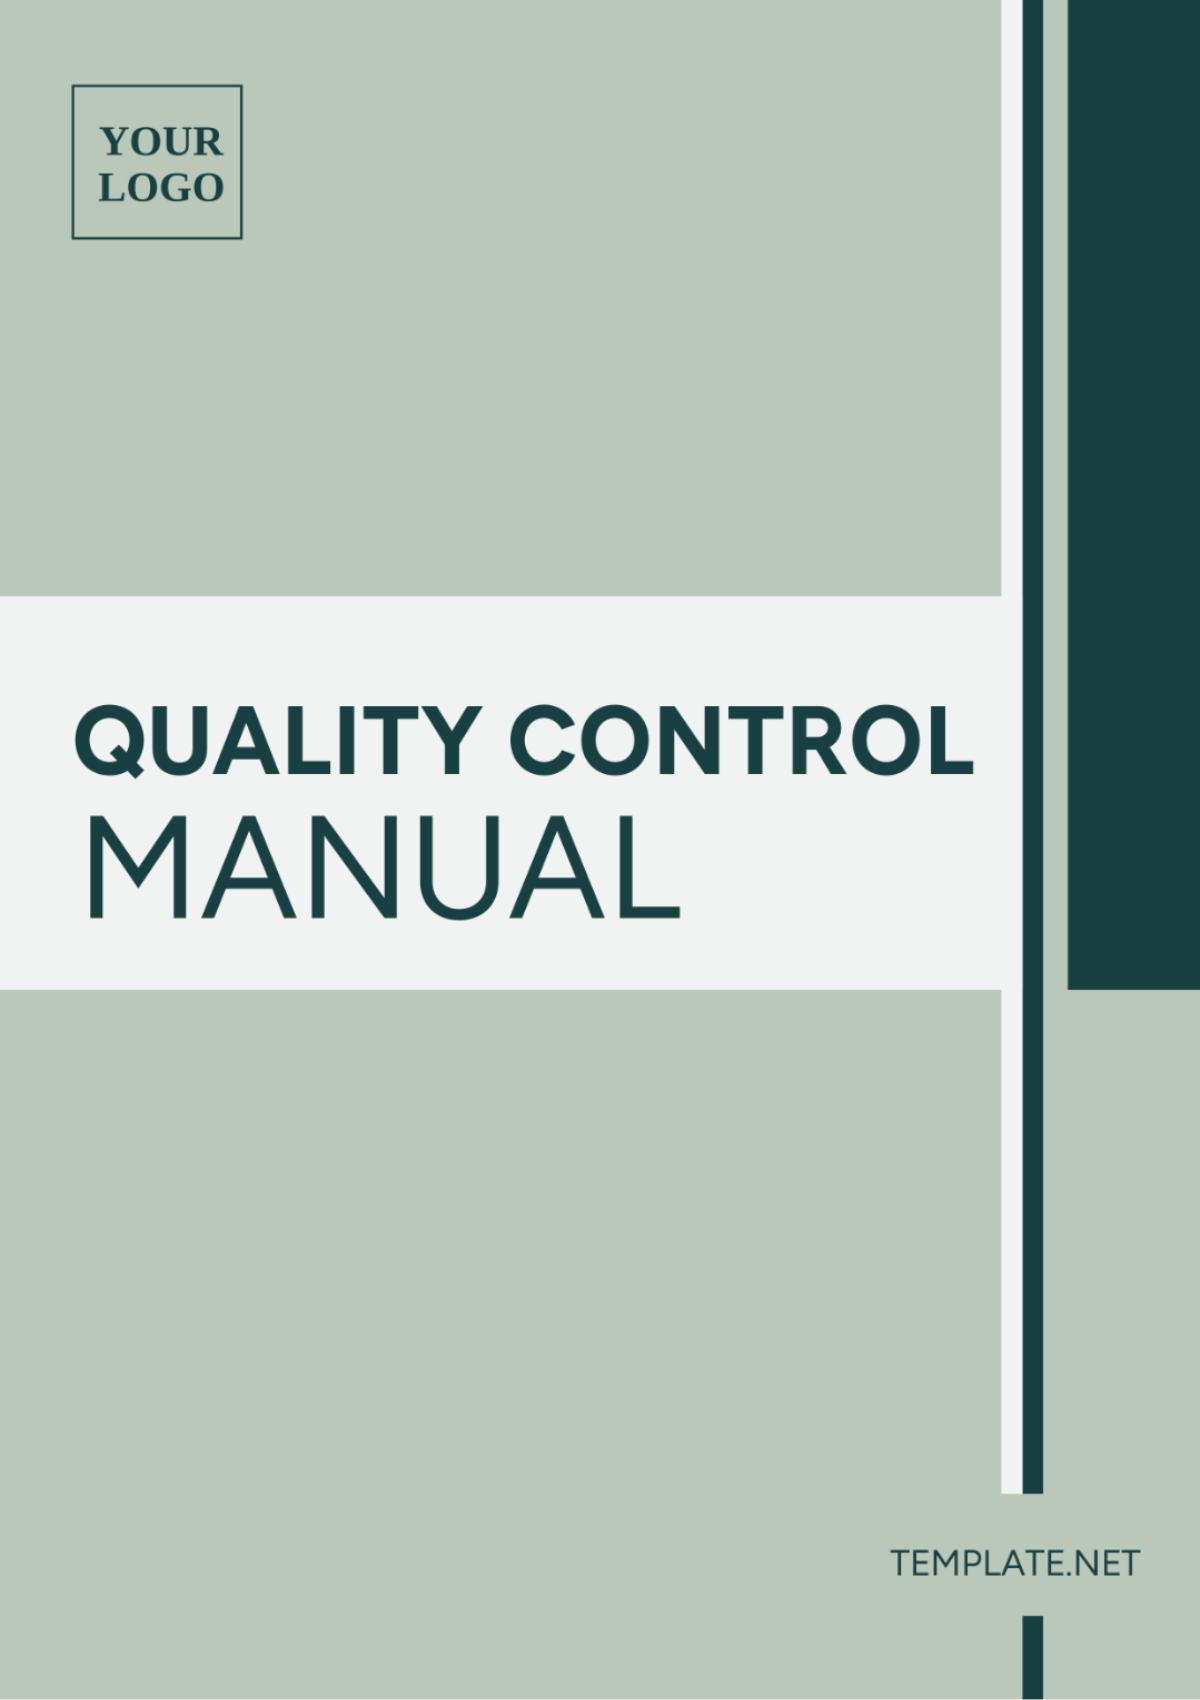 Free Quality Control Manual Template